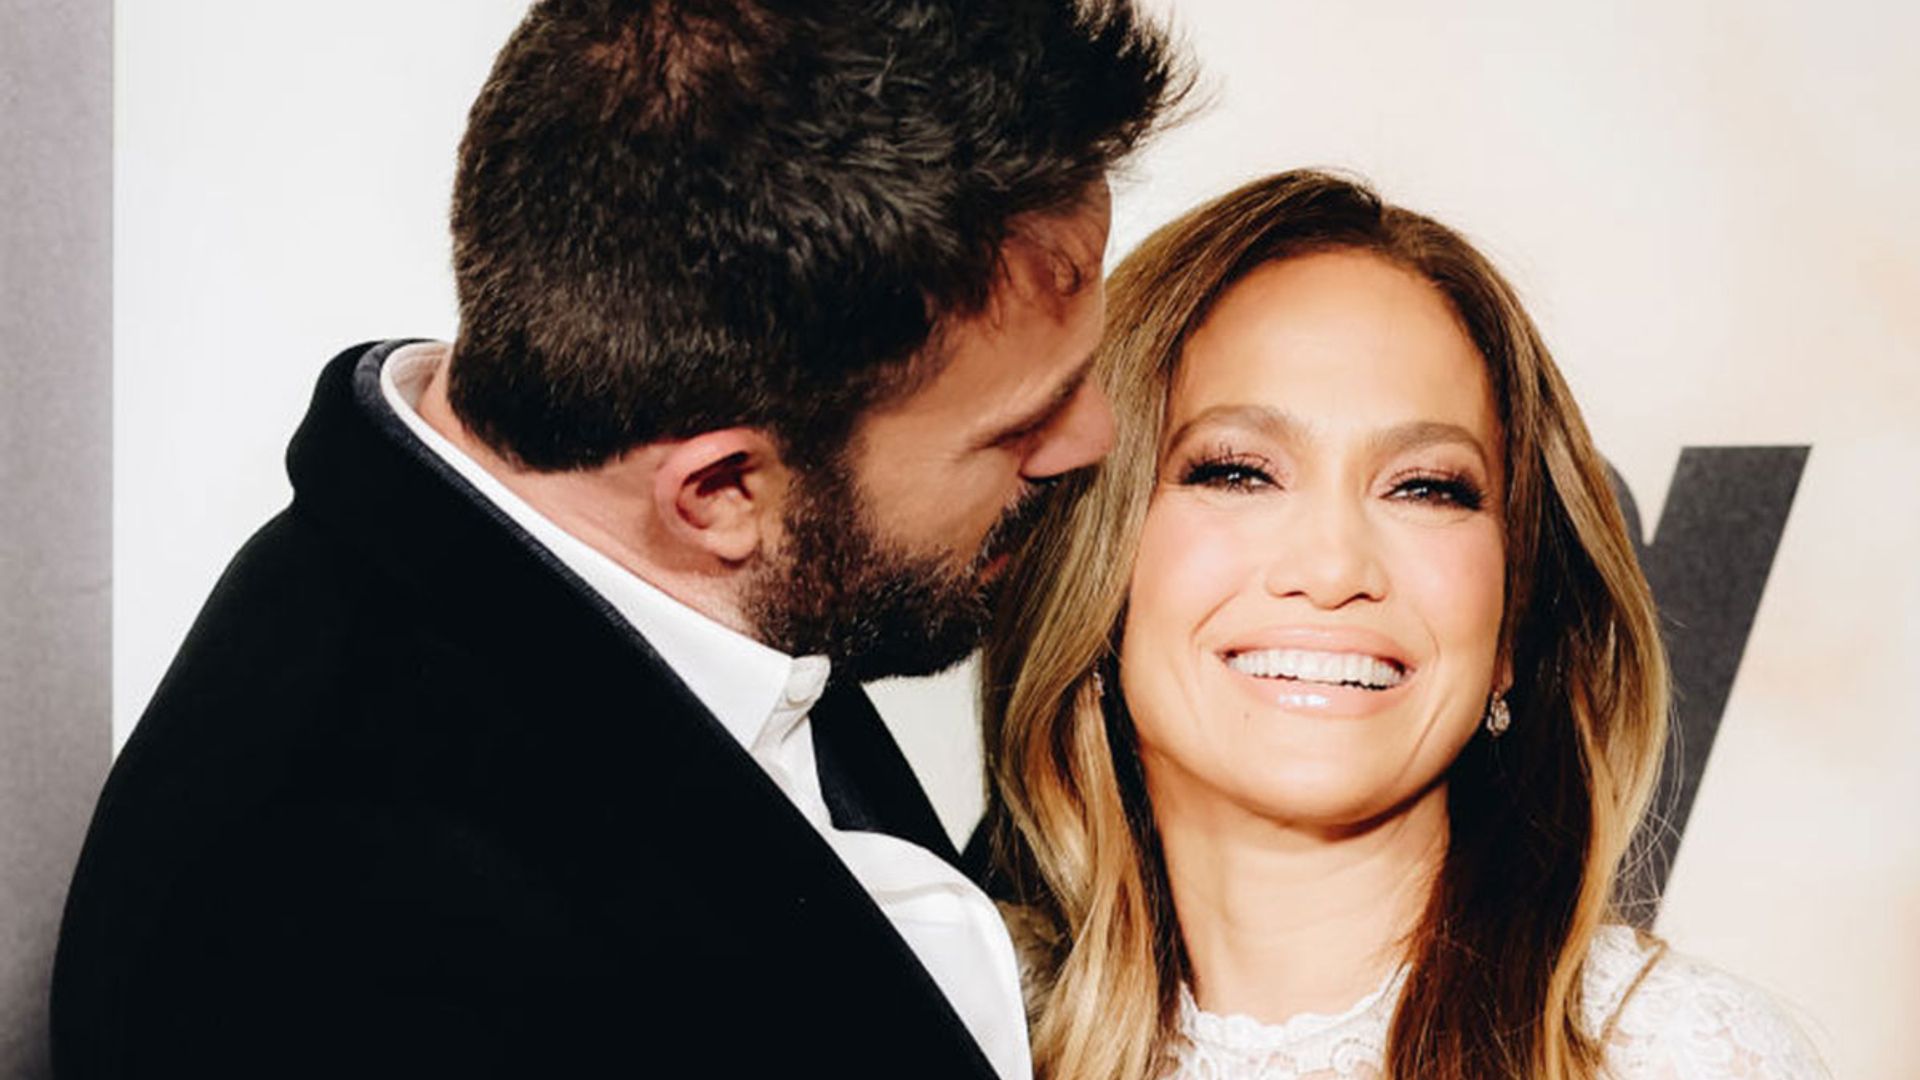 Jennifer Lopez wows in bridal style dress for a very special occasion